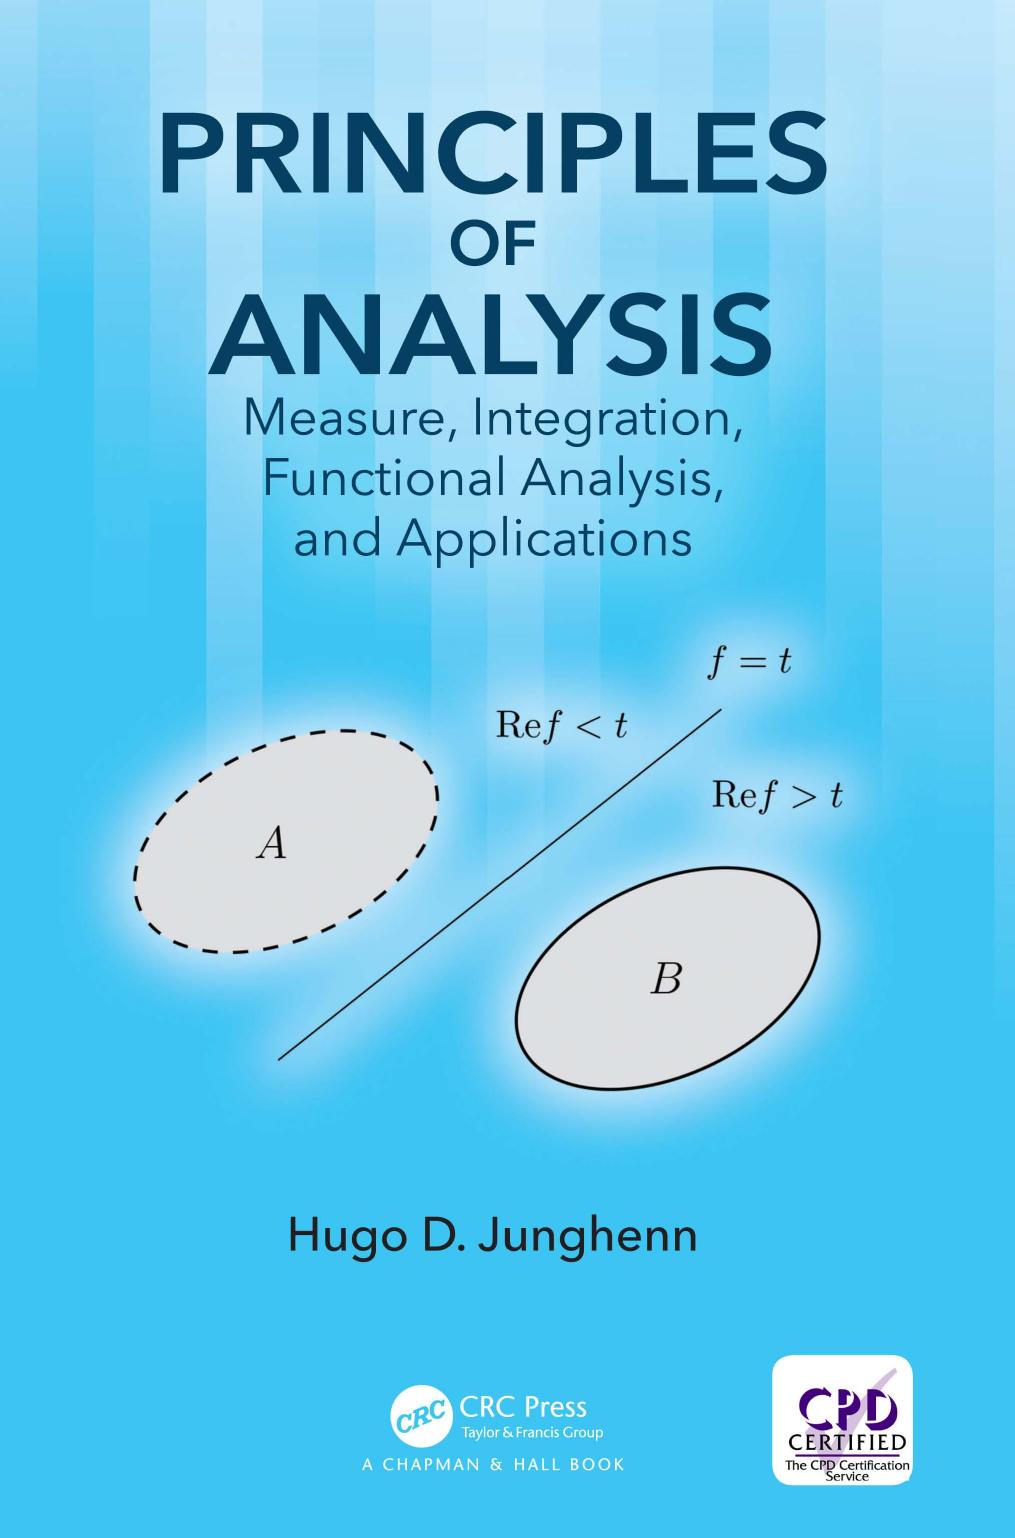 Principles of Analysis: Measure, Integration, Functional Analysis, and Applications